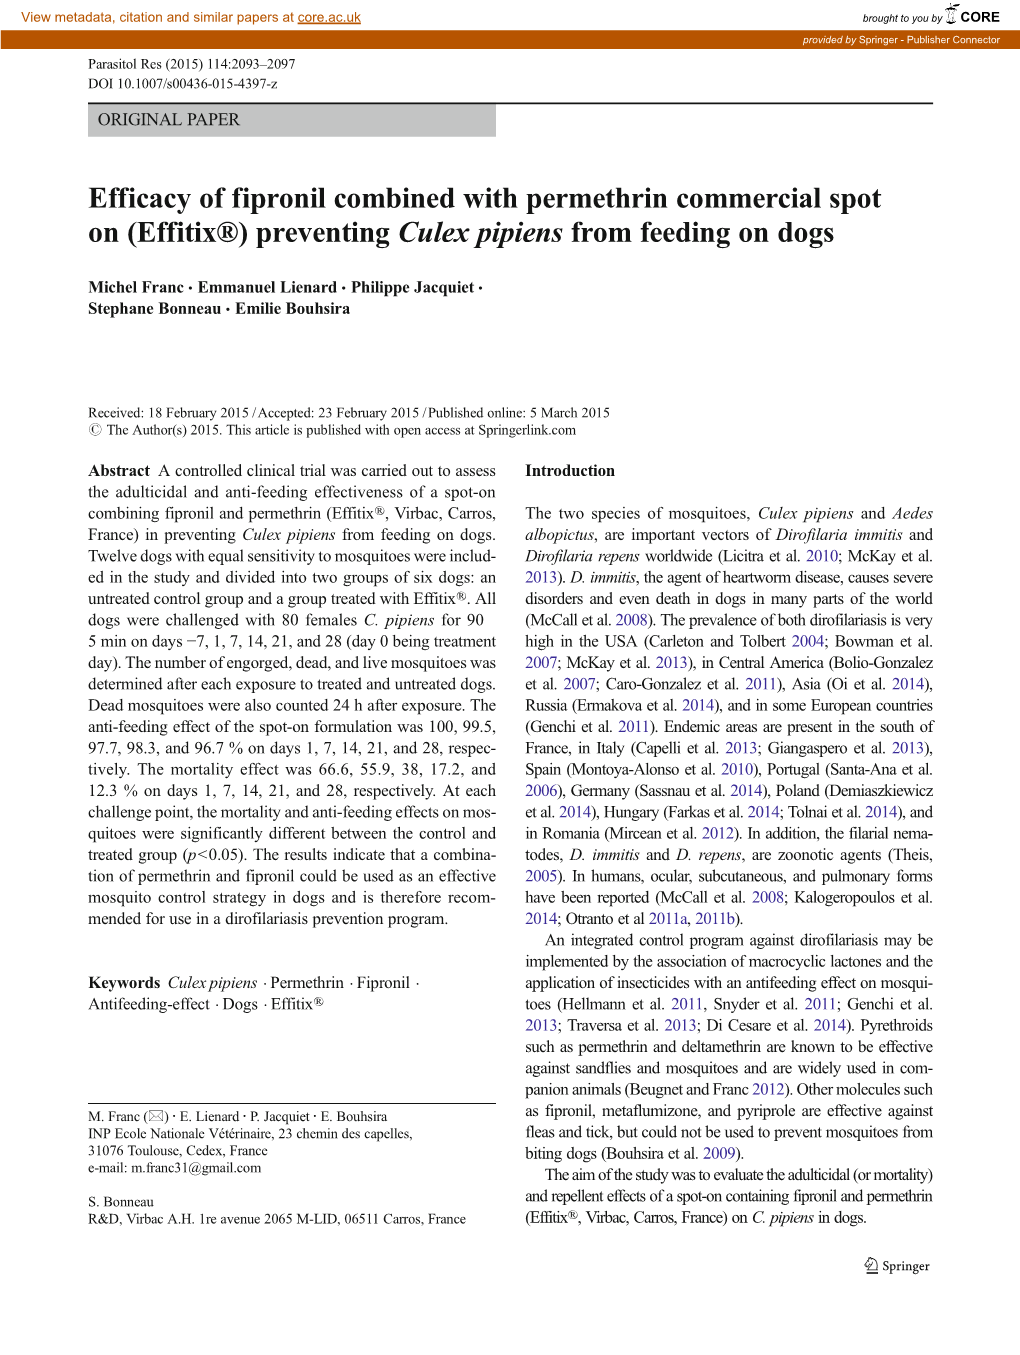 Efficacy of Fipronil Combined with Permethrin Commercial Spot on (Effitix®) Preventing Culex Pipiens from Feeding on Dogs